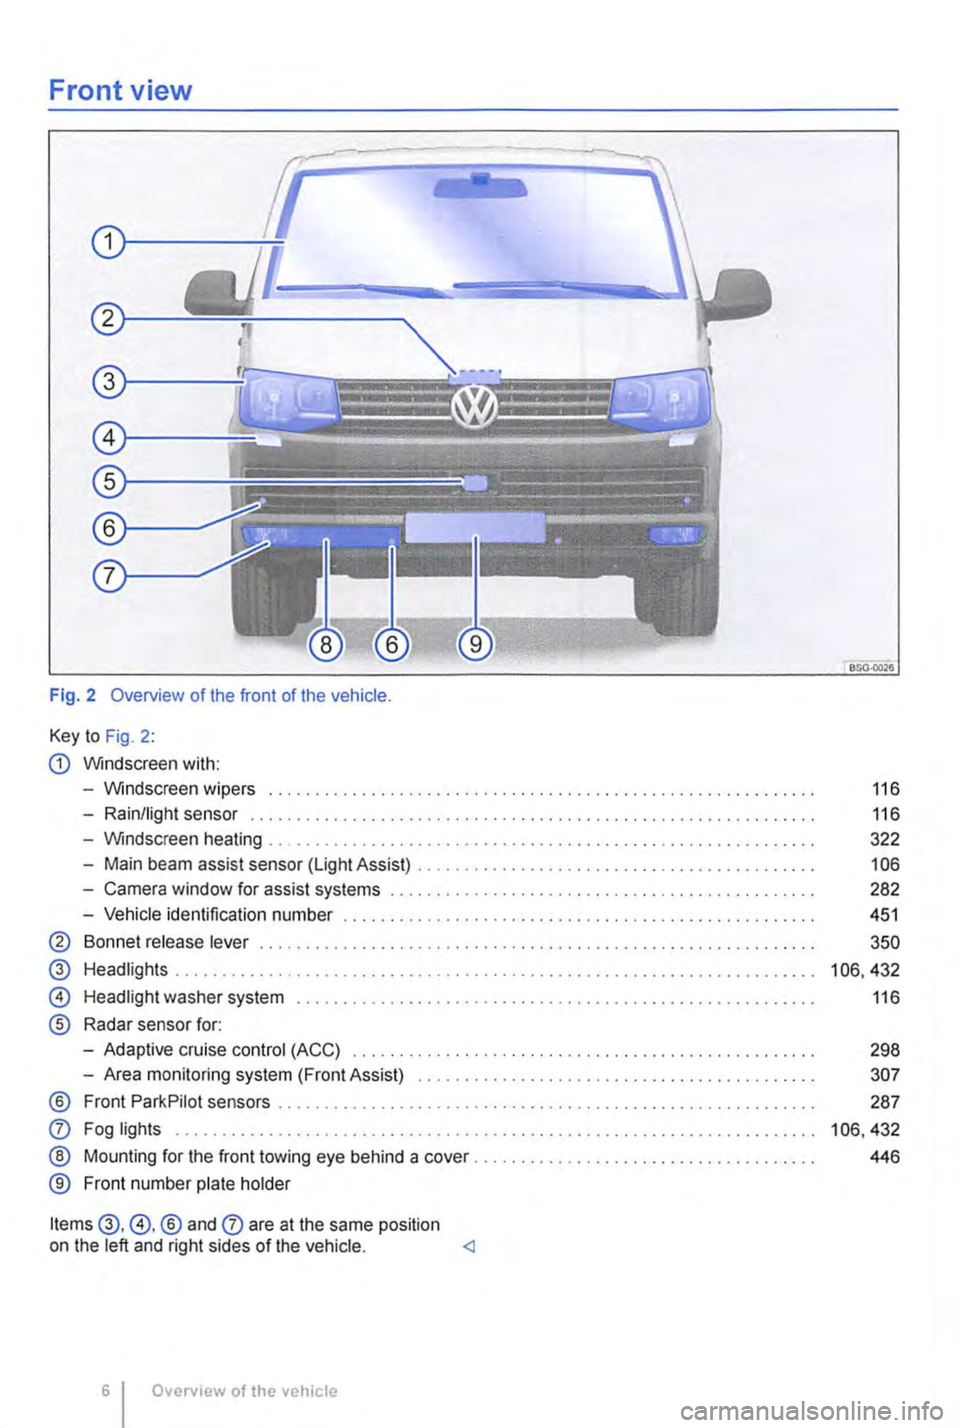 VOLKSWAGEN TRANSPORTER 2014  Owners Manual Front view 
Fig. 2 Overview of the front of the vehicle. 
Key to Fig. 2: 
G) Windscreen with: 
-Windscreen wipers .............. . 
-Rain/light sensor .............. . 
-Windscreen heating 
-Main beam